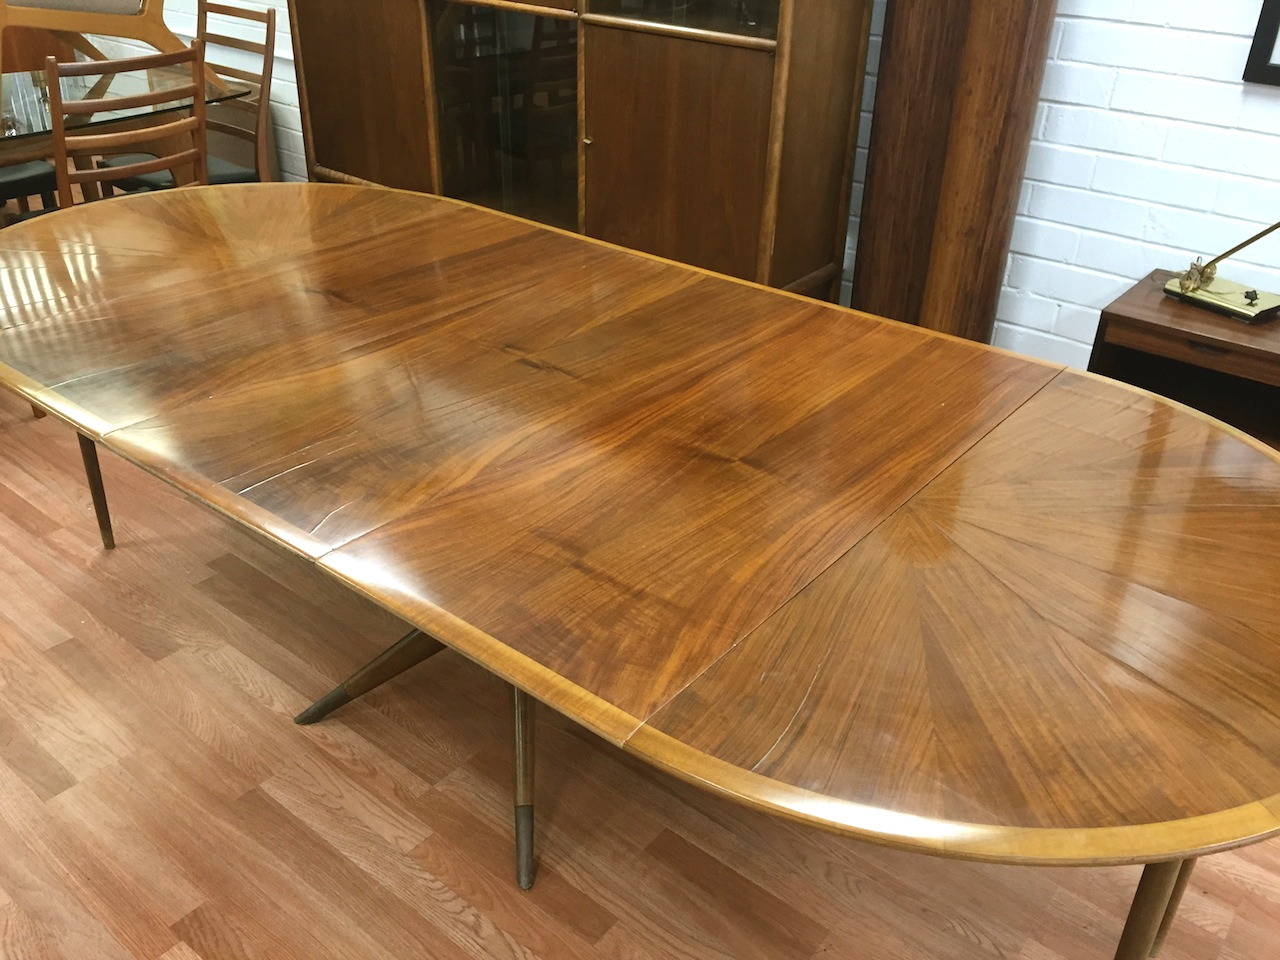 Mid-20th Century Sculptural Dining Table with Three Leaves by Melchiorre Bega